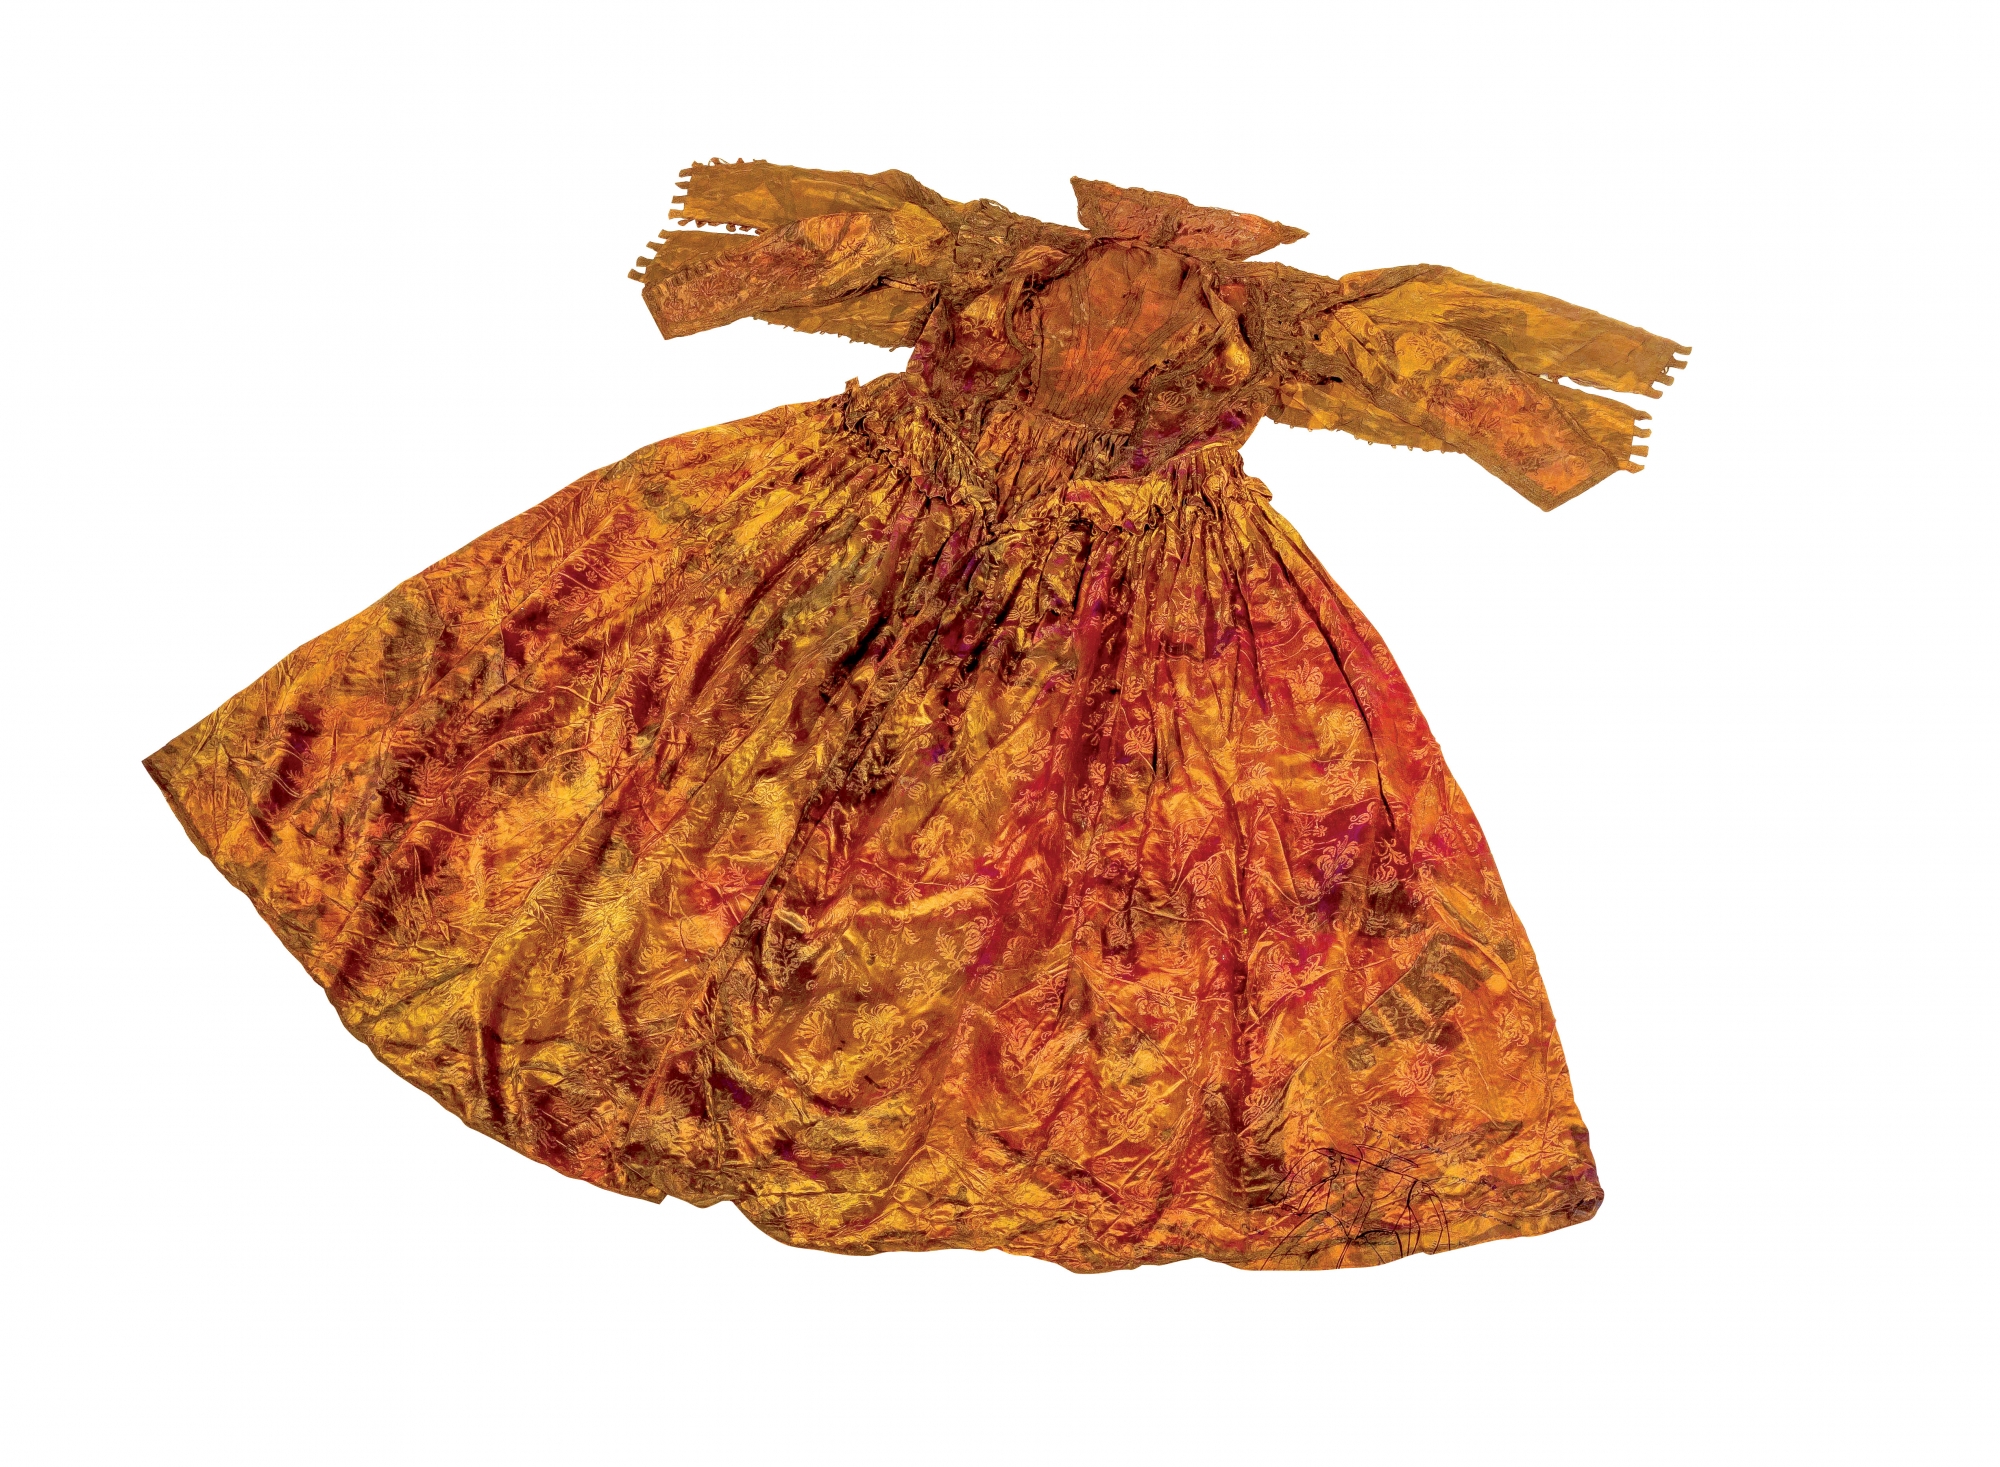 Dress found off the coast of Texel in April, 2015. Copyright Museum Kaap Skil